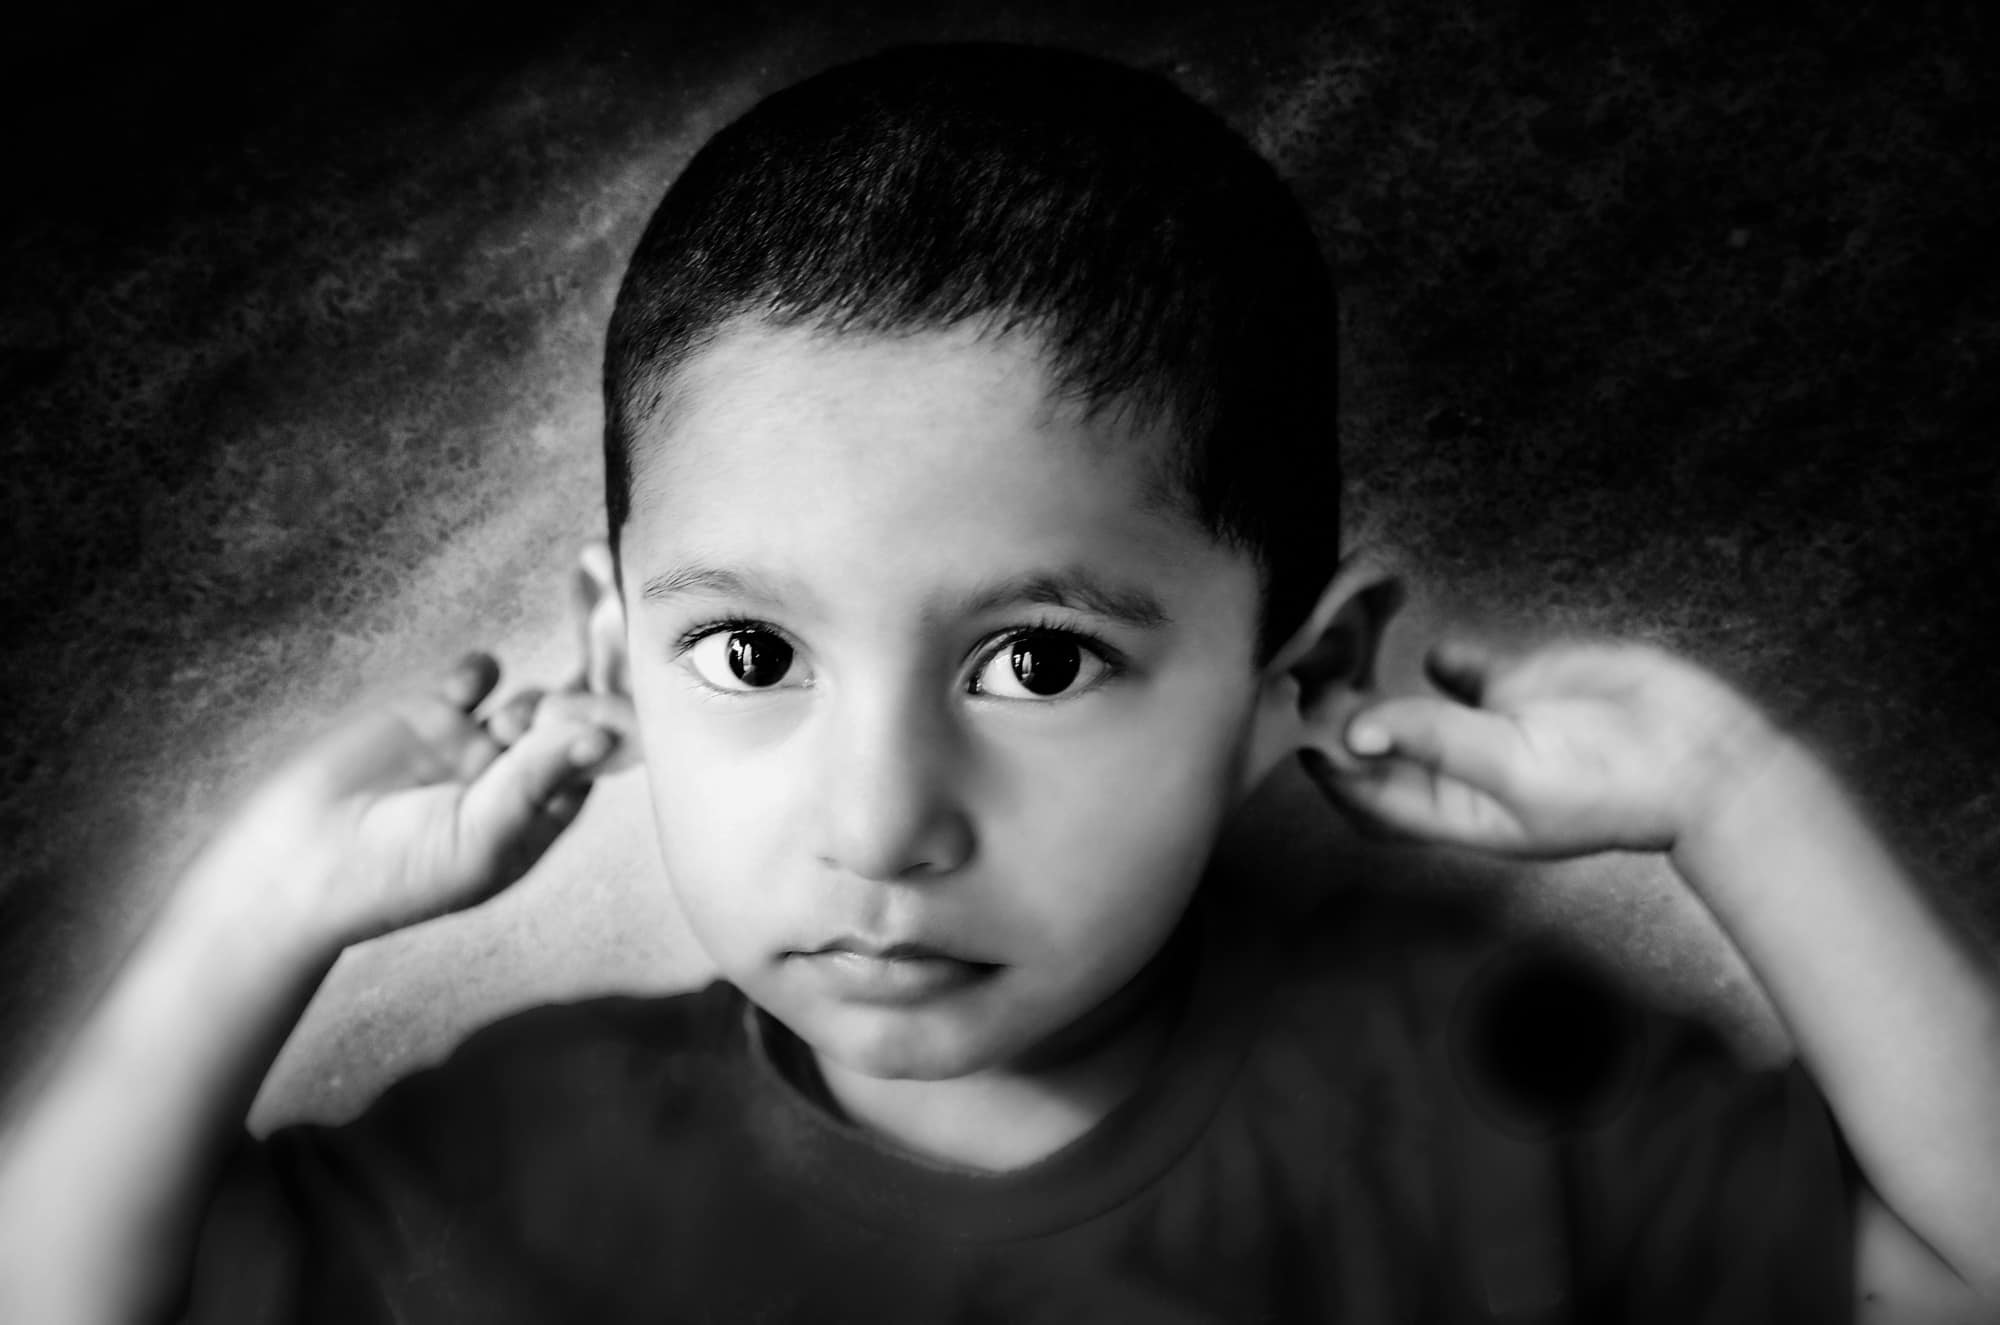 23-attention-food, 2015, Asian and Indian Ethnicities, Black And White, Child, Childhood